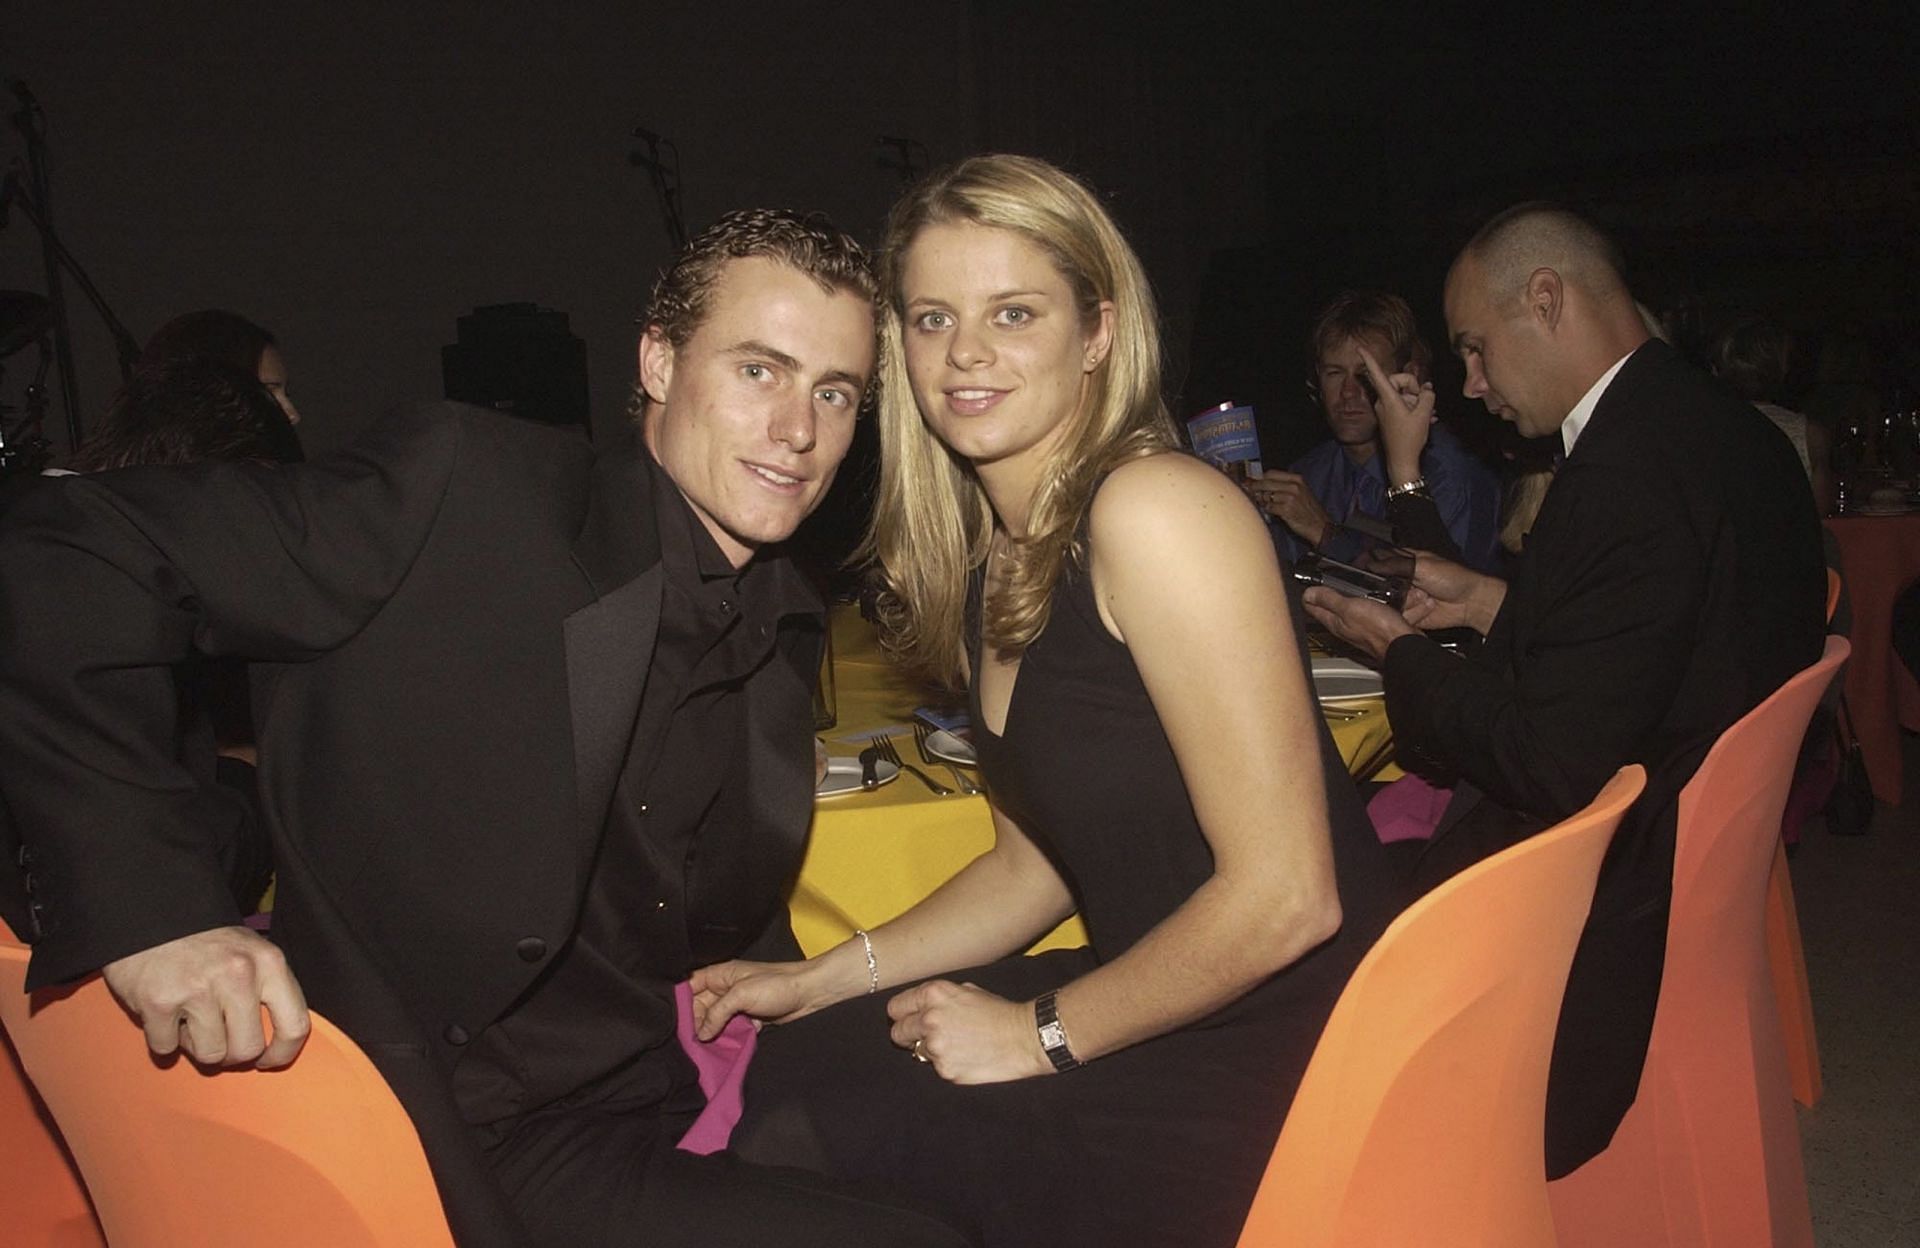 Kim Clijsters (right) and Lleyton Hewitt